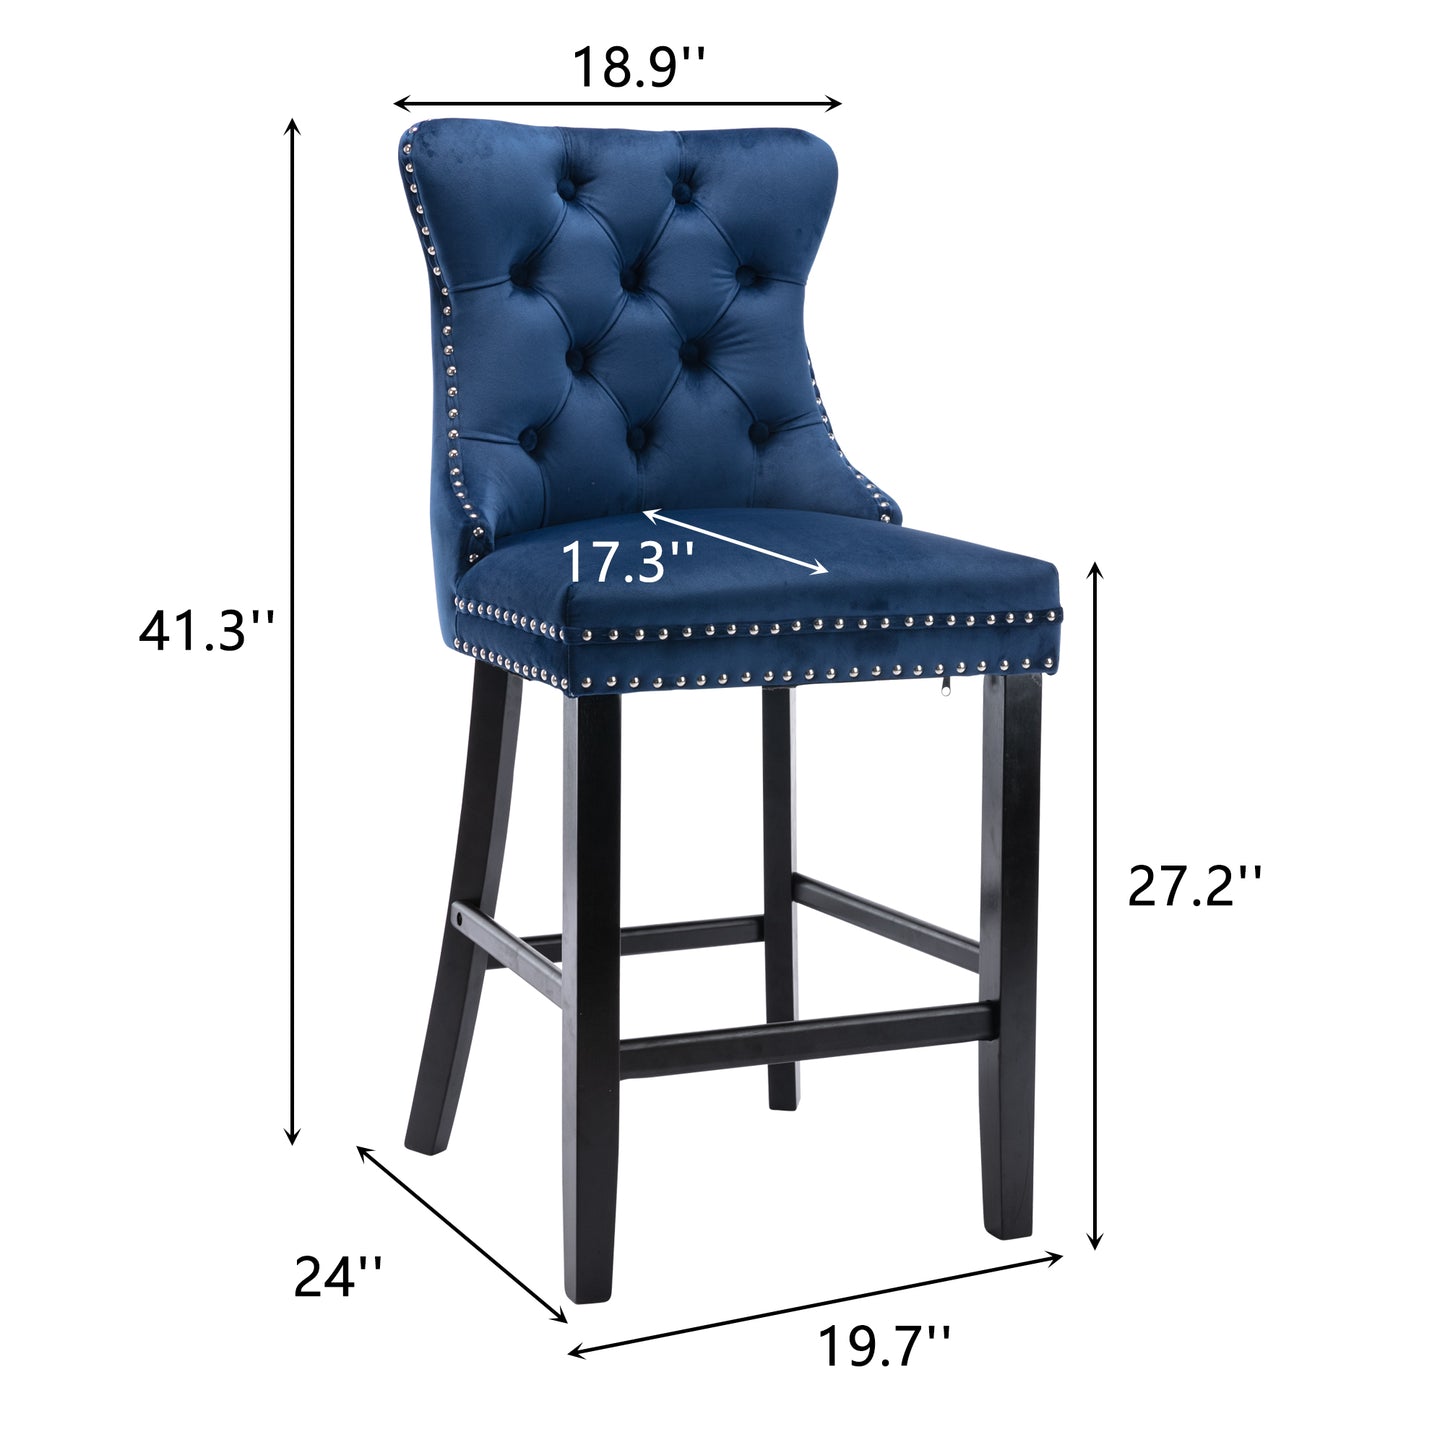 SYNGAR Bar Stools Set of 2, Velvet Upholstered Bar Chair with Wood Legs Nailhead Trim Tufted Back, High End Counter Height Bar Stools, Bar Chairs for Bar Counter Kitchen, Wood Barstool Set, Blue